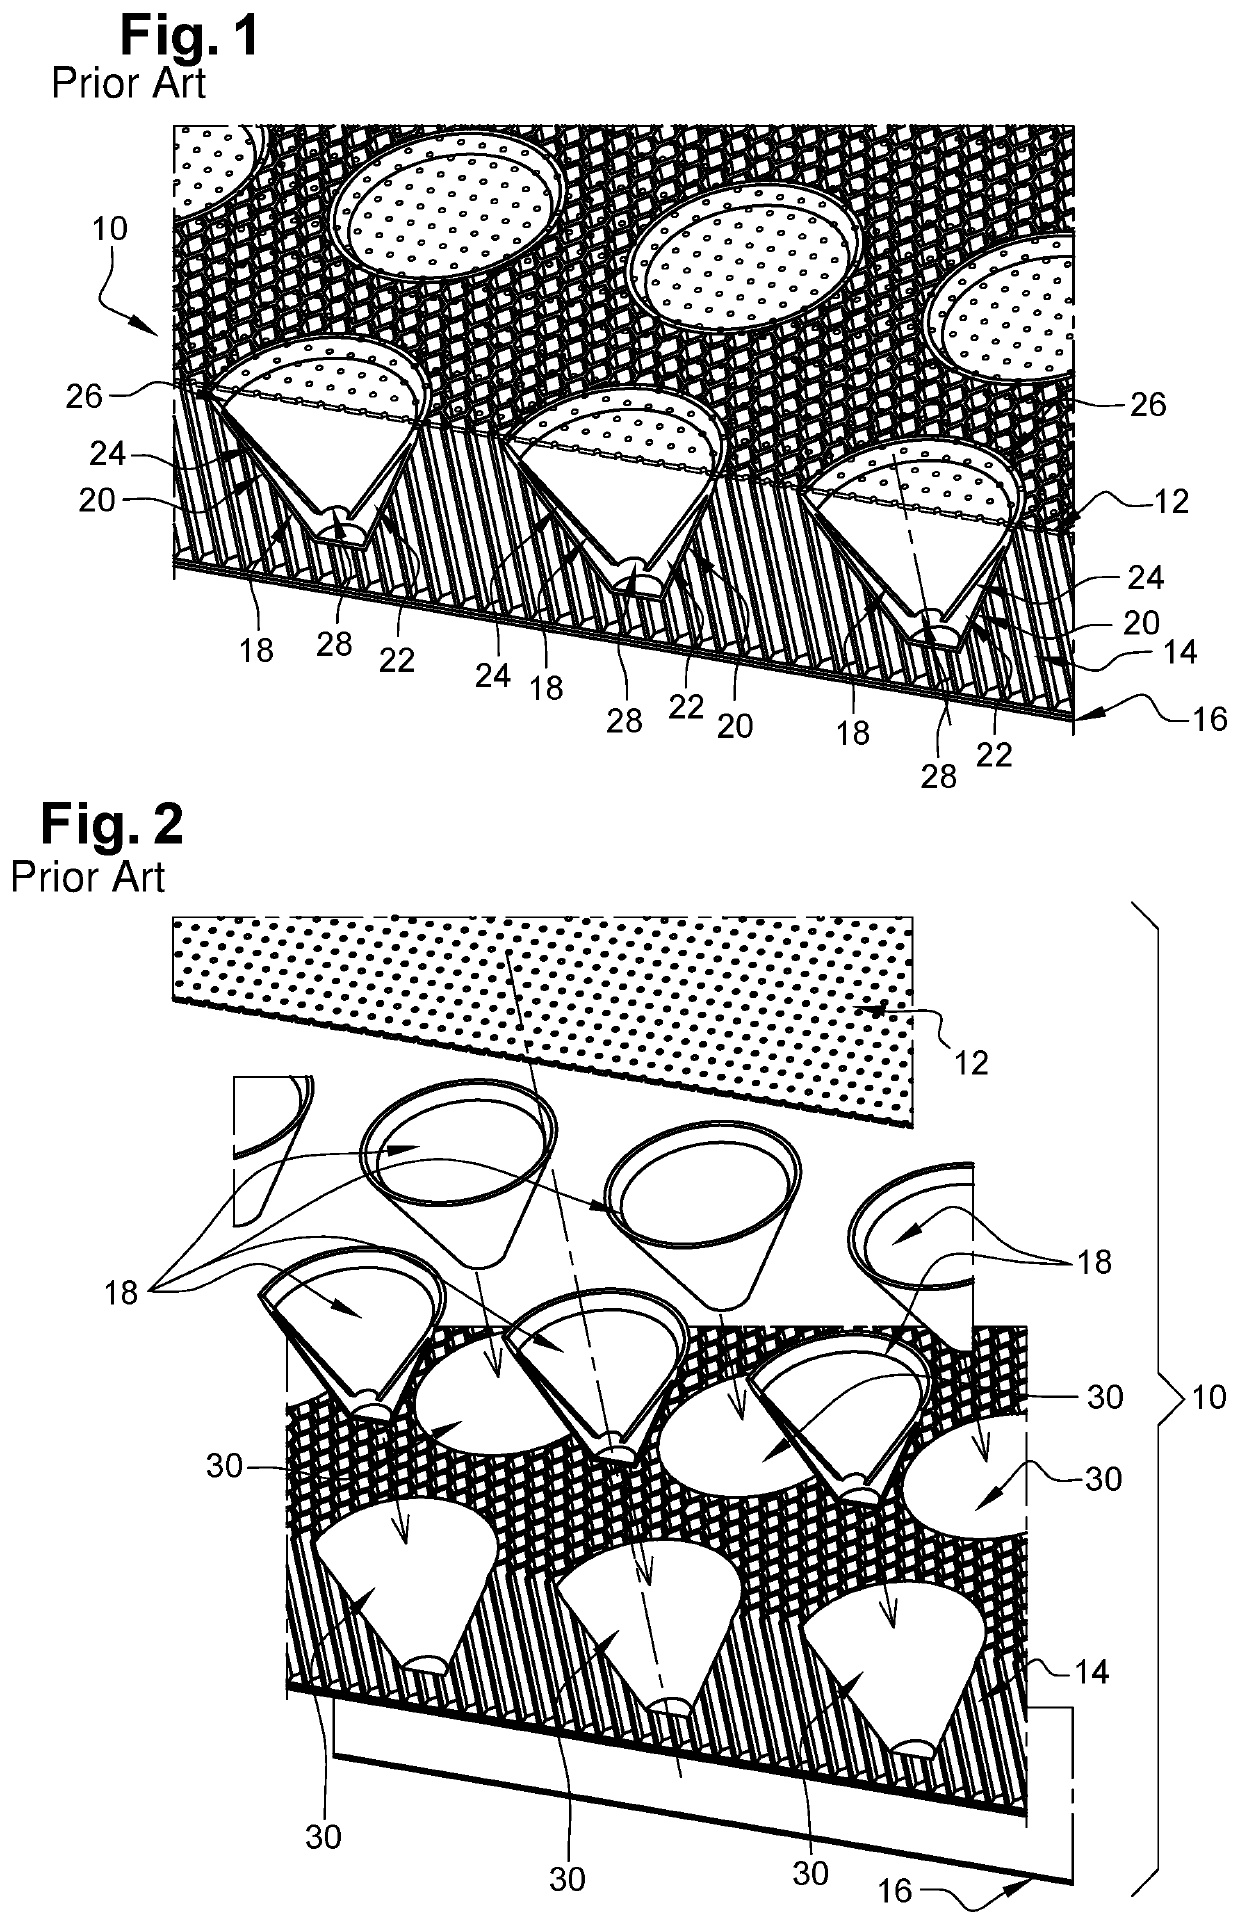 Method for producing an acoustic absorption structure comprising a skin forming a plurality of enclosures, acoustic absorption structure obtained according to said method and aircraft comprising said acoustic absorption structure